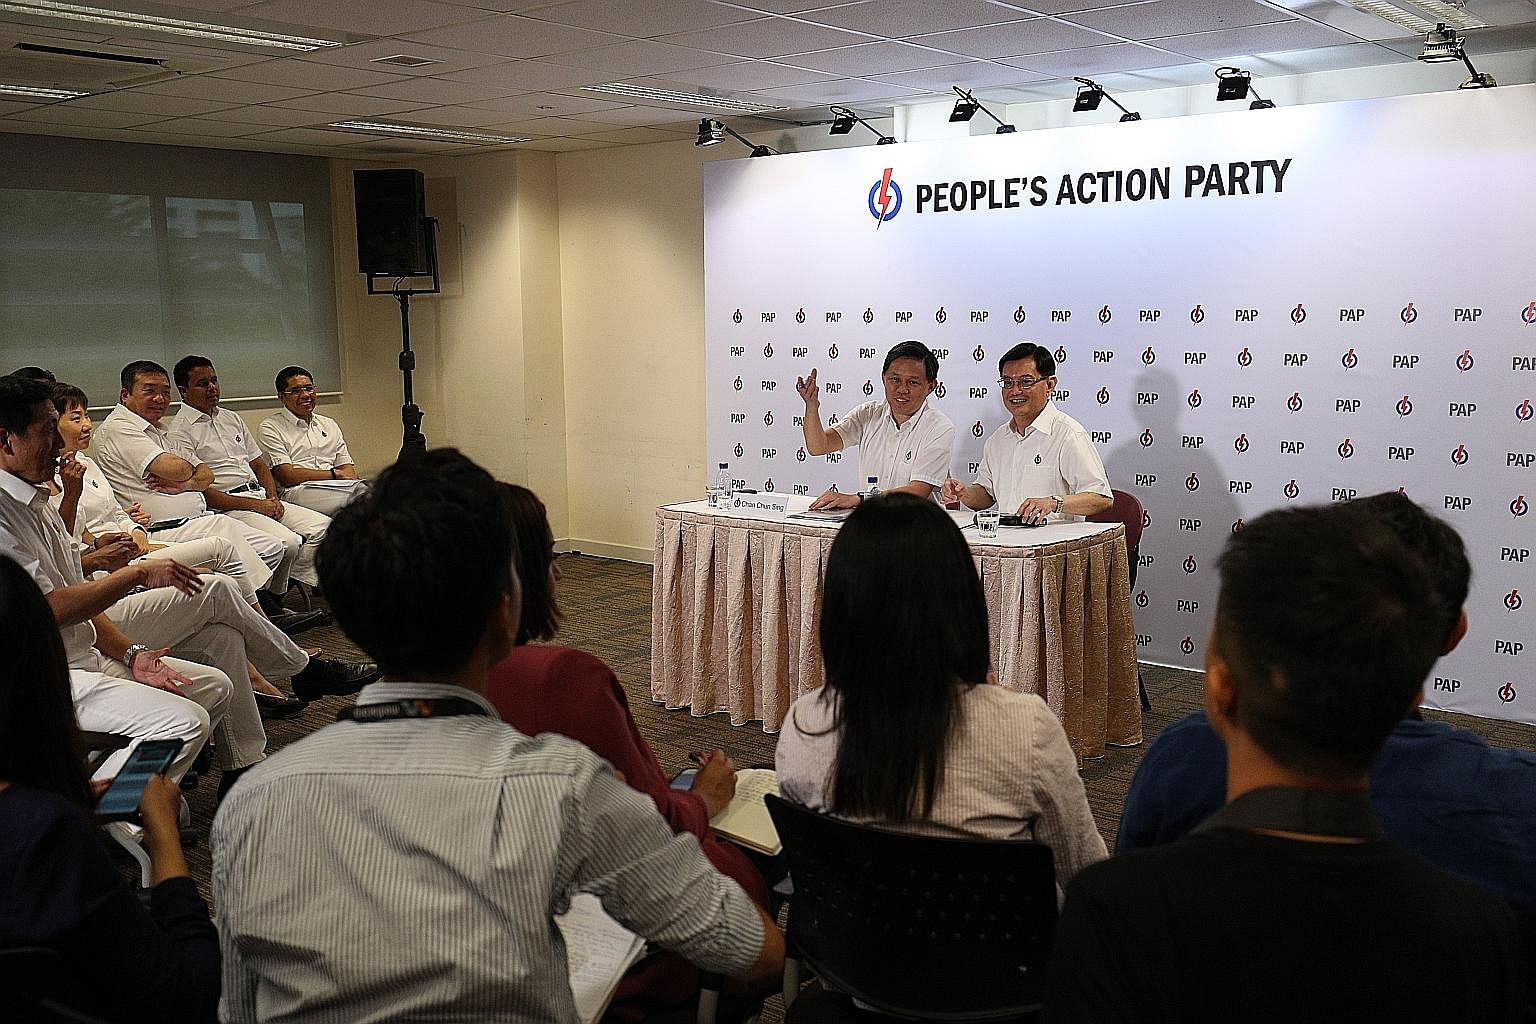 People's Action Party first assistant secretary-general Heng Swee Keat (right) and second assistant secretary-general Chan Chun Sing at the party's media conference on Friday to announce the new line-up of the party's Central Executive Committee.